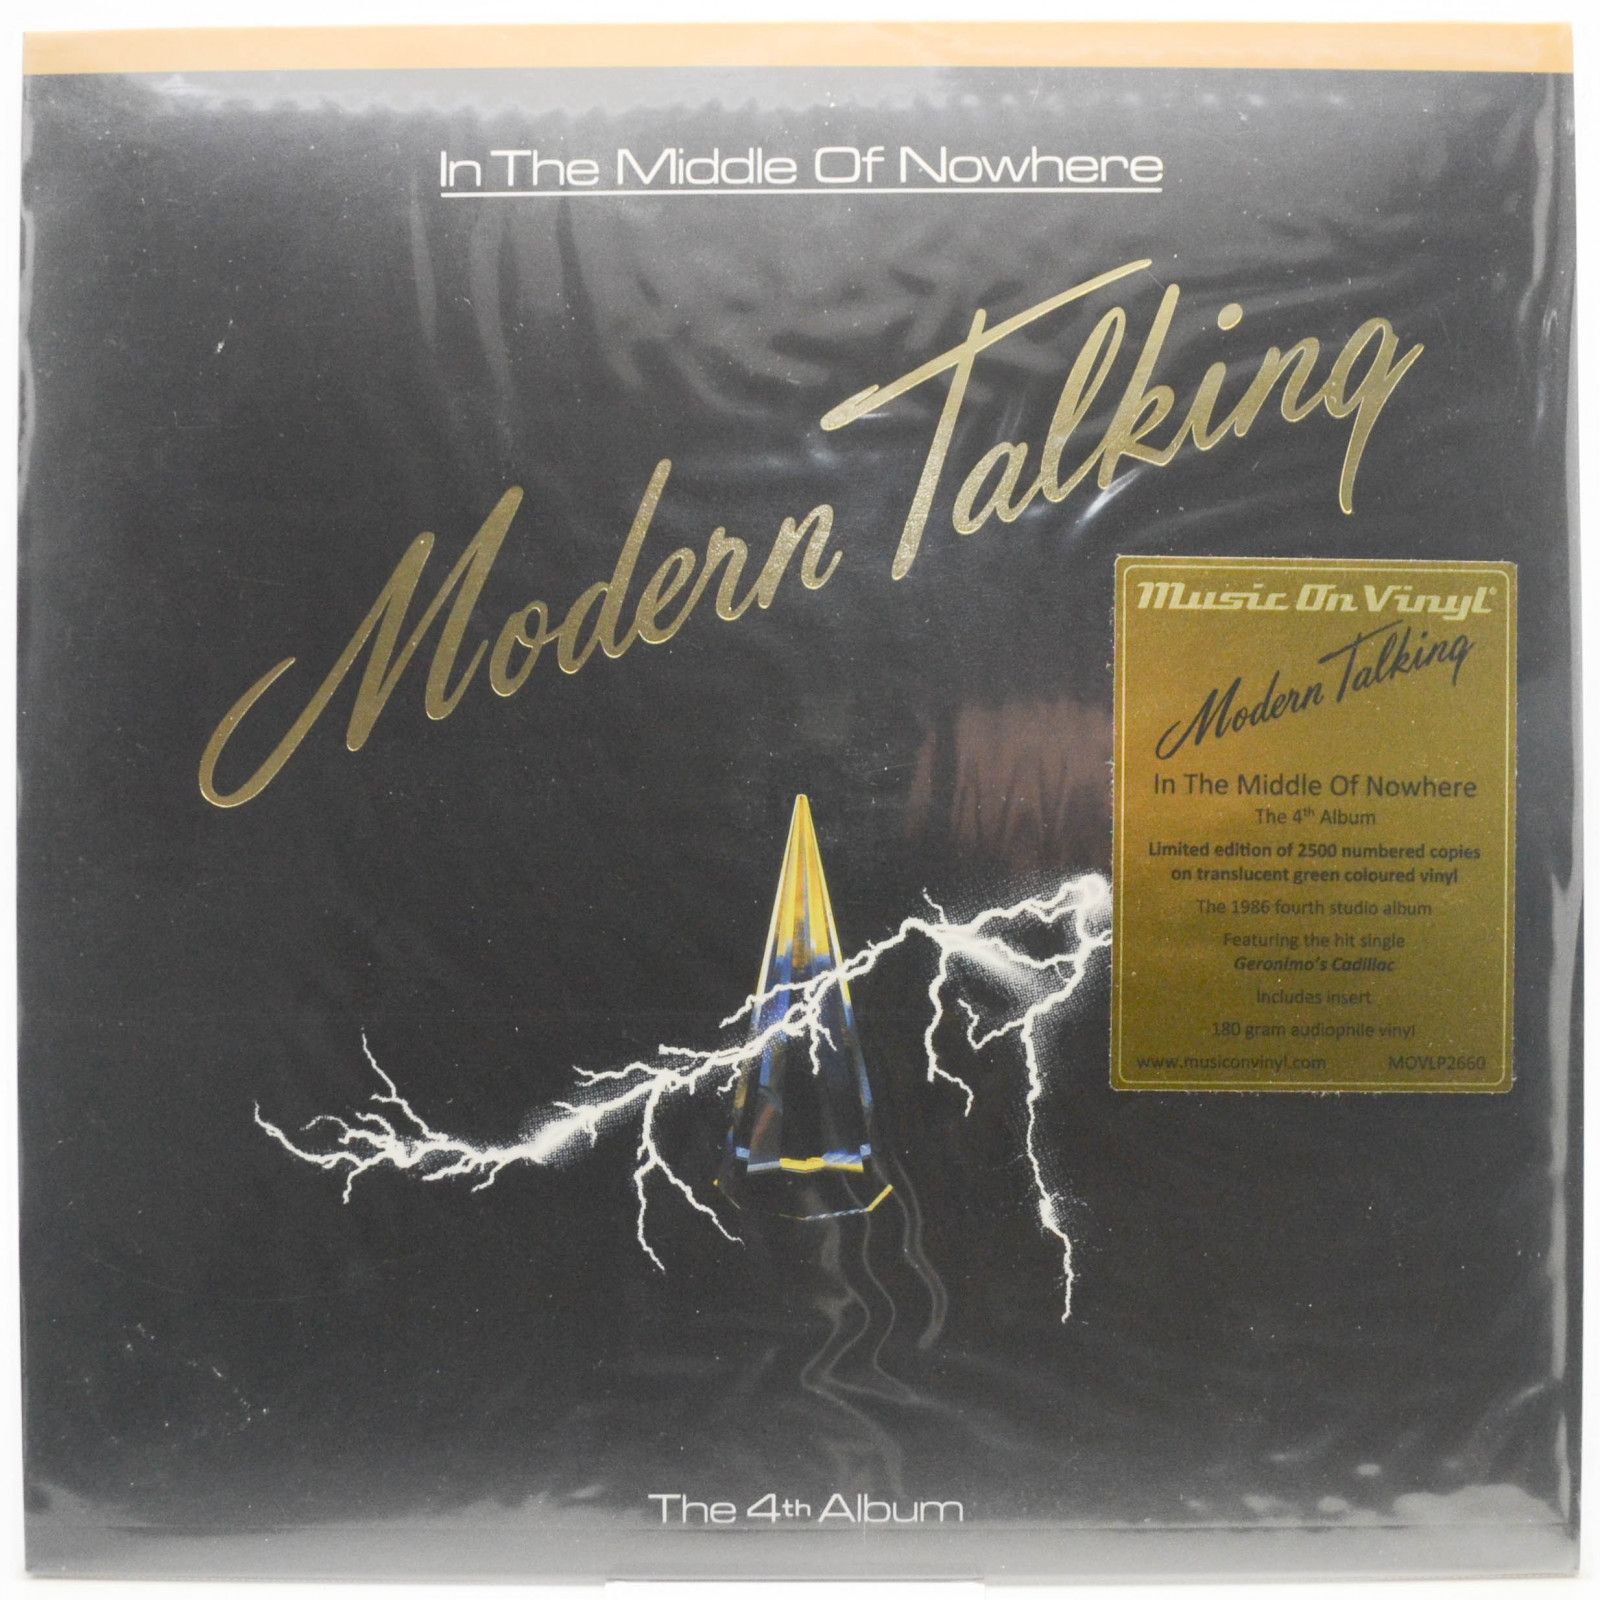 Modern Talking — In The Middle Of Nowhere - The 4th Album, 1985